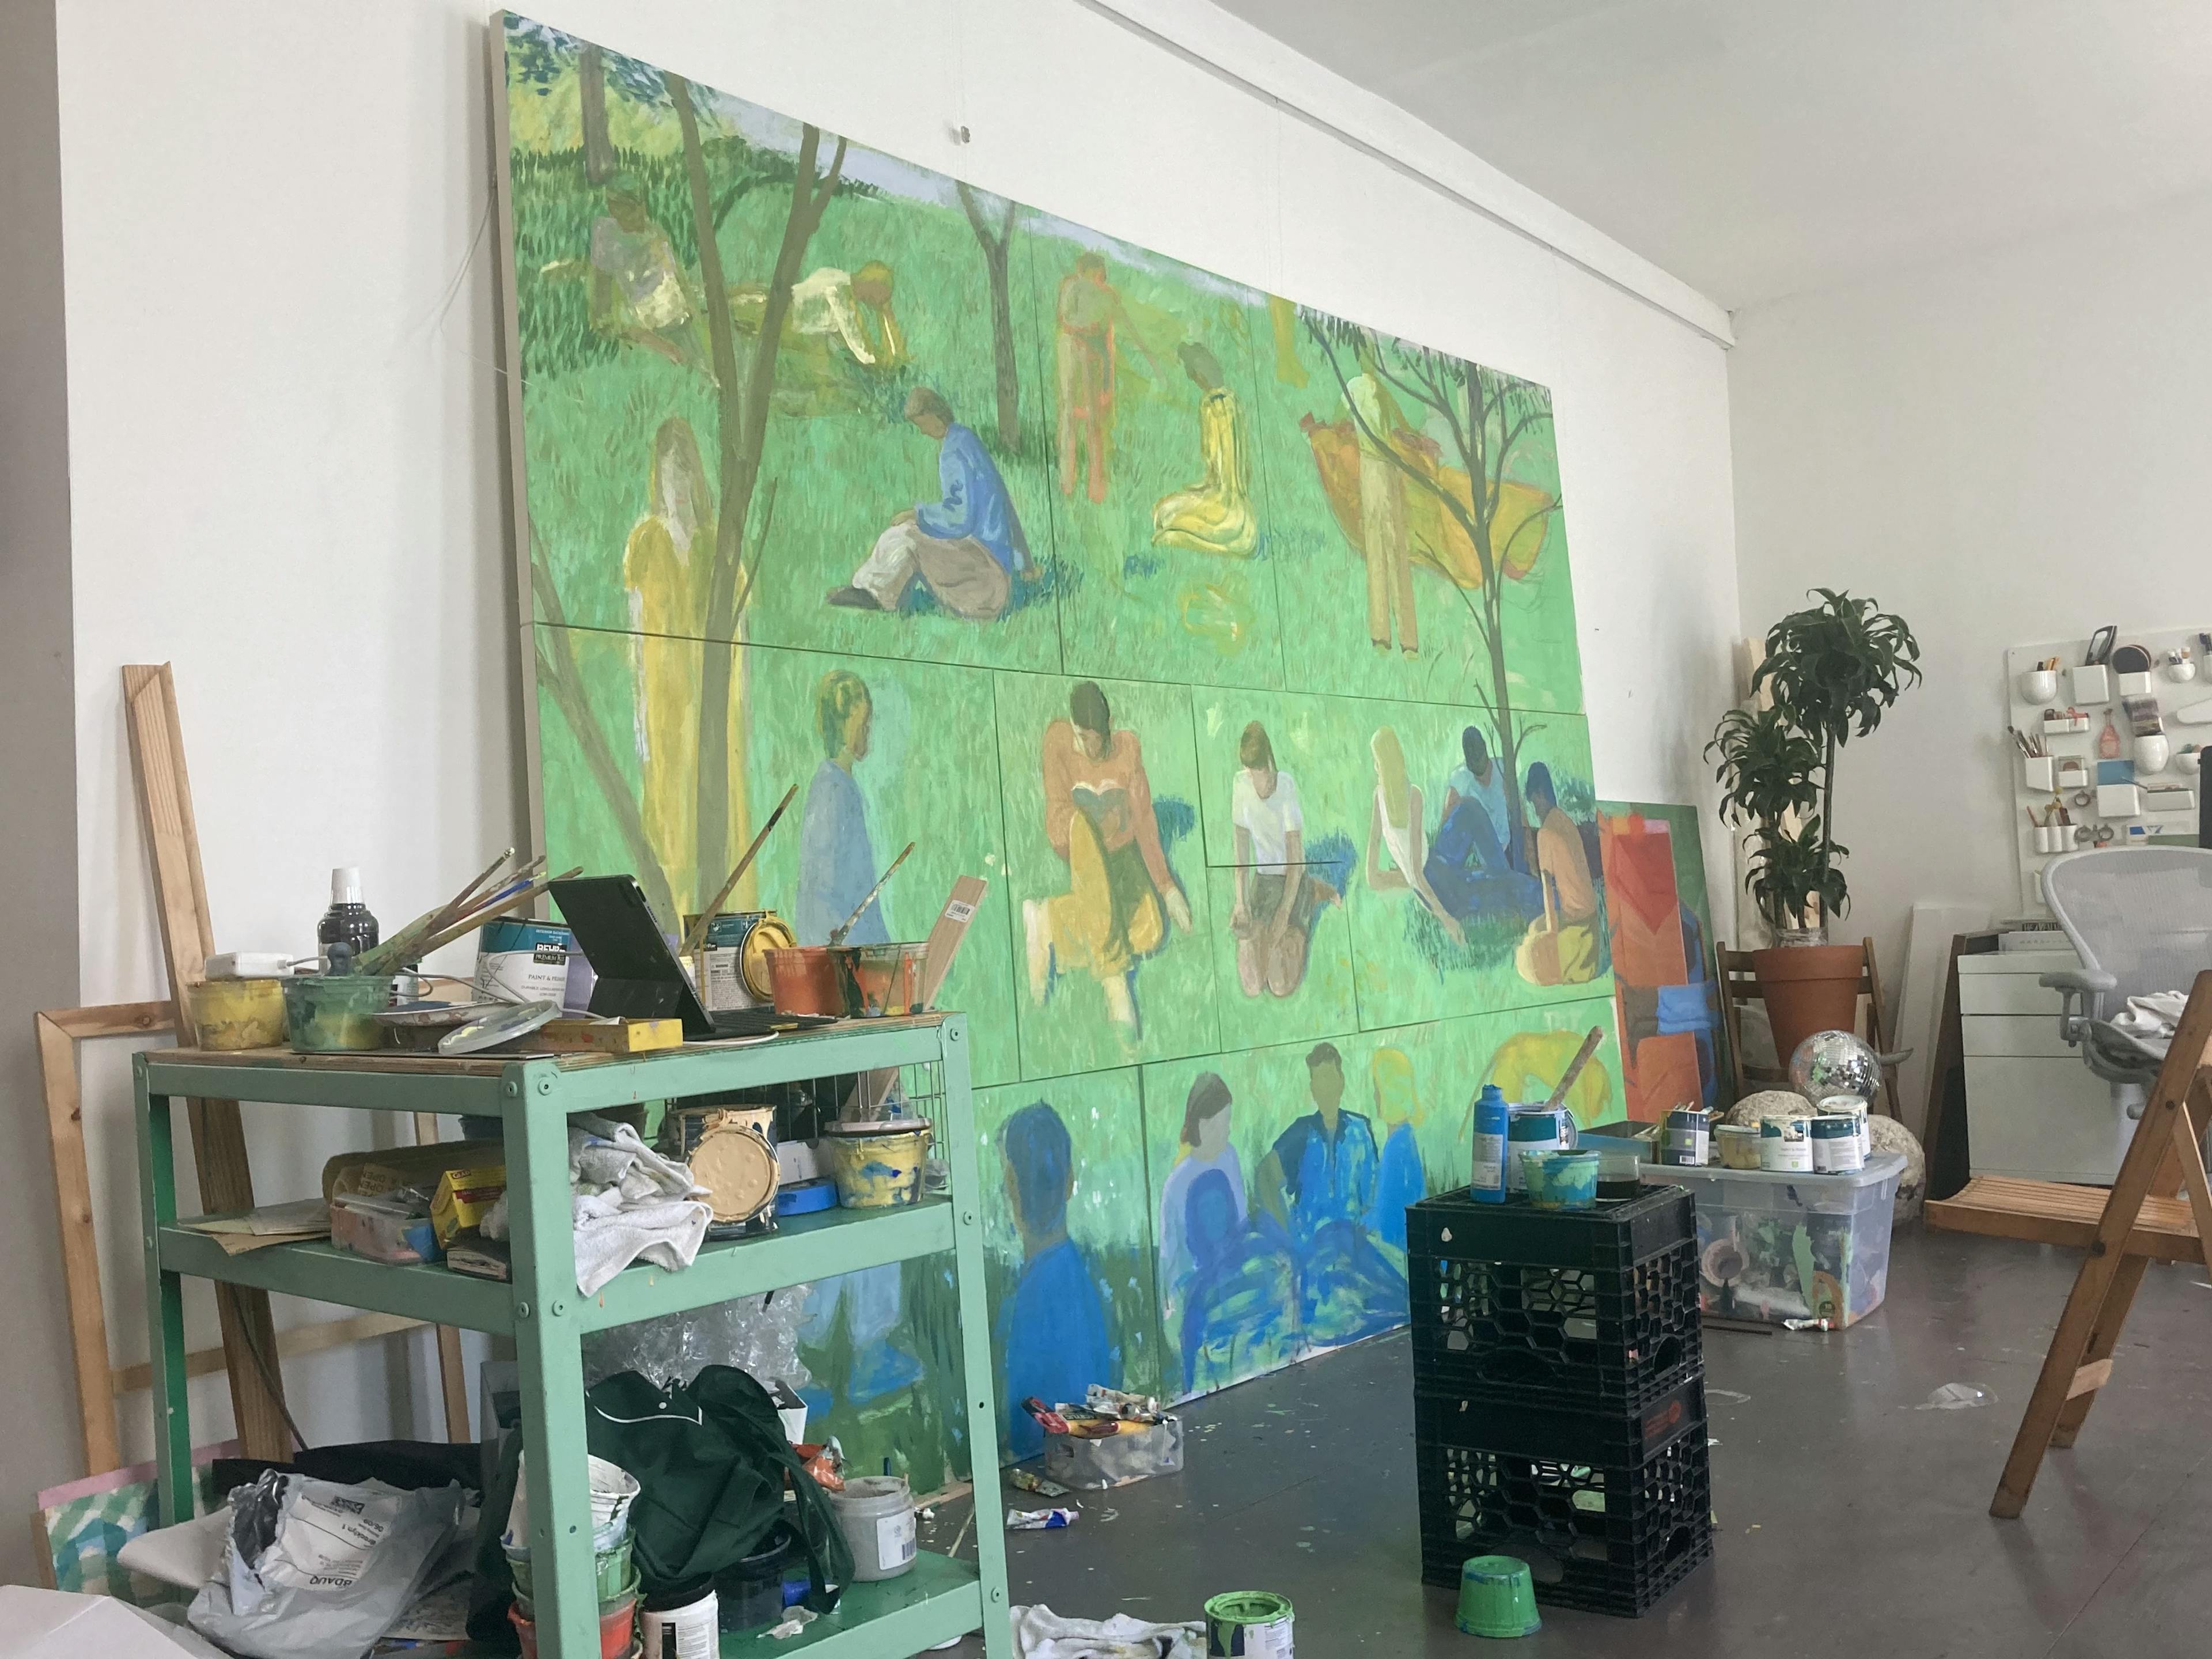 A large-scale installation comprised of multiple paintings of figures sitting in a grassy park by artist Jackson Joyce leaning against a white wall in his studio.